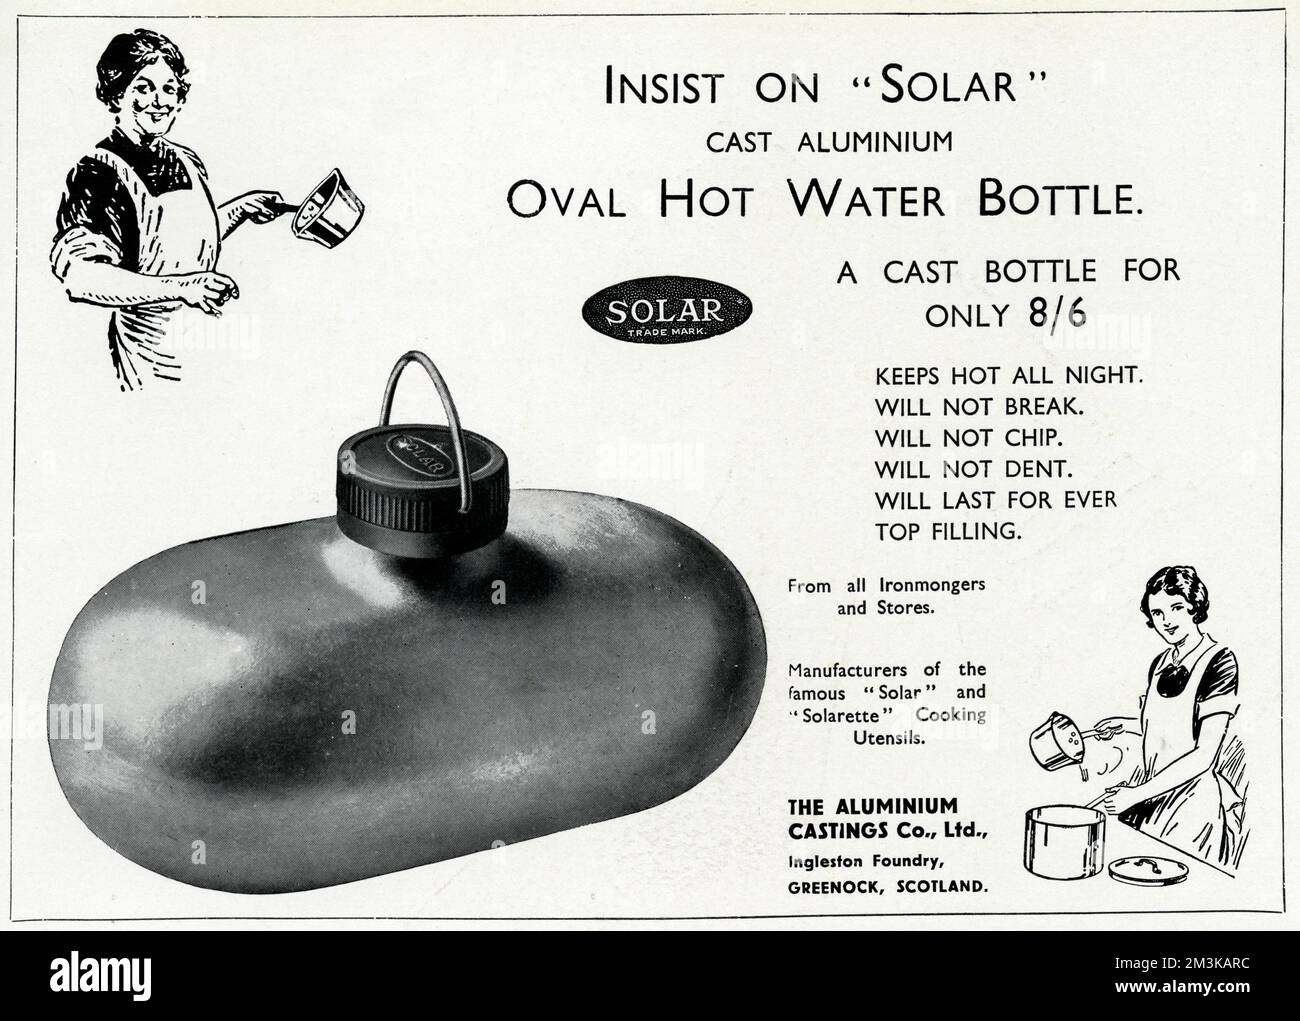 Insist on 'solar' cast aluminium oval hot water bottle.  Keeps hot all night.  Will not break.  Will not chip.  Will not dent.  Will last for ever.  Top filling.  1933 Stock Photo